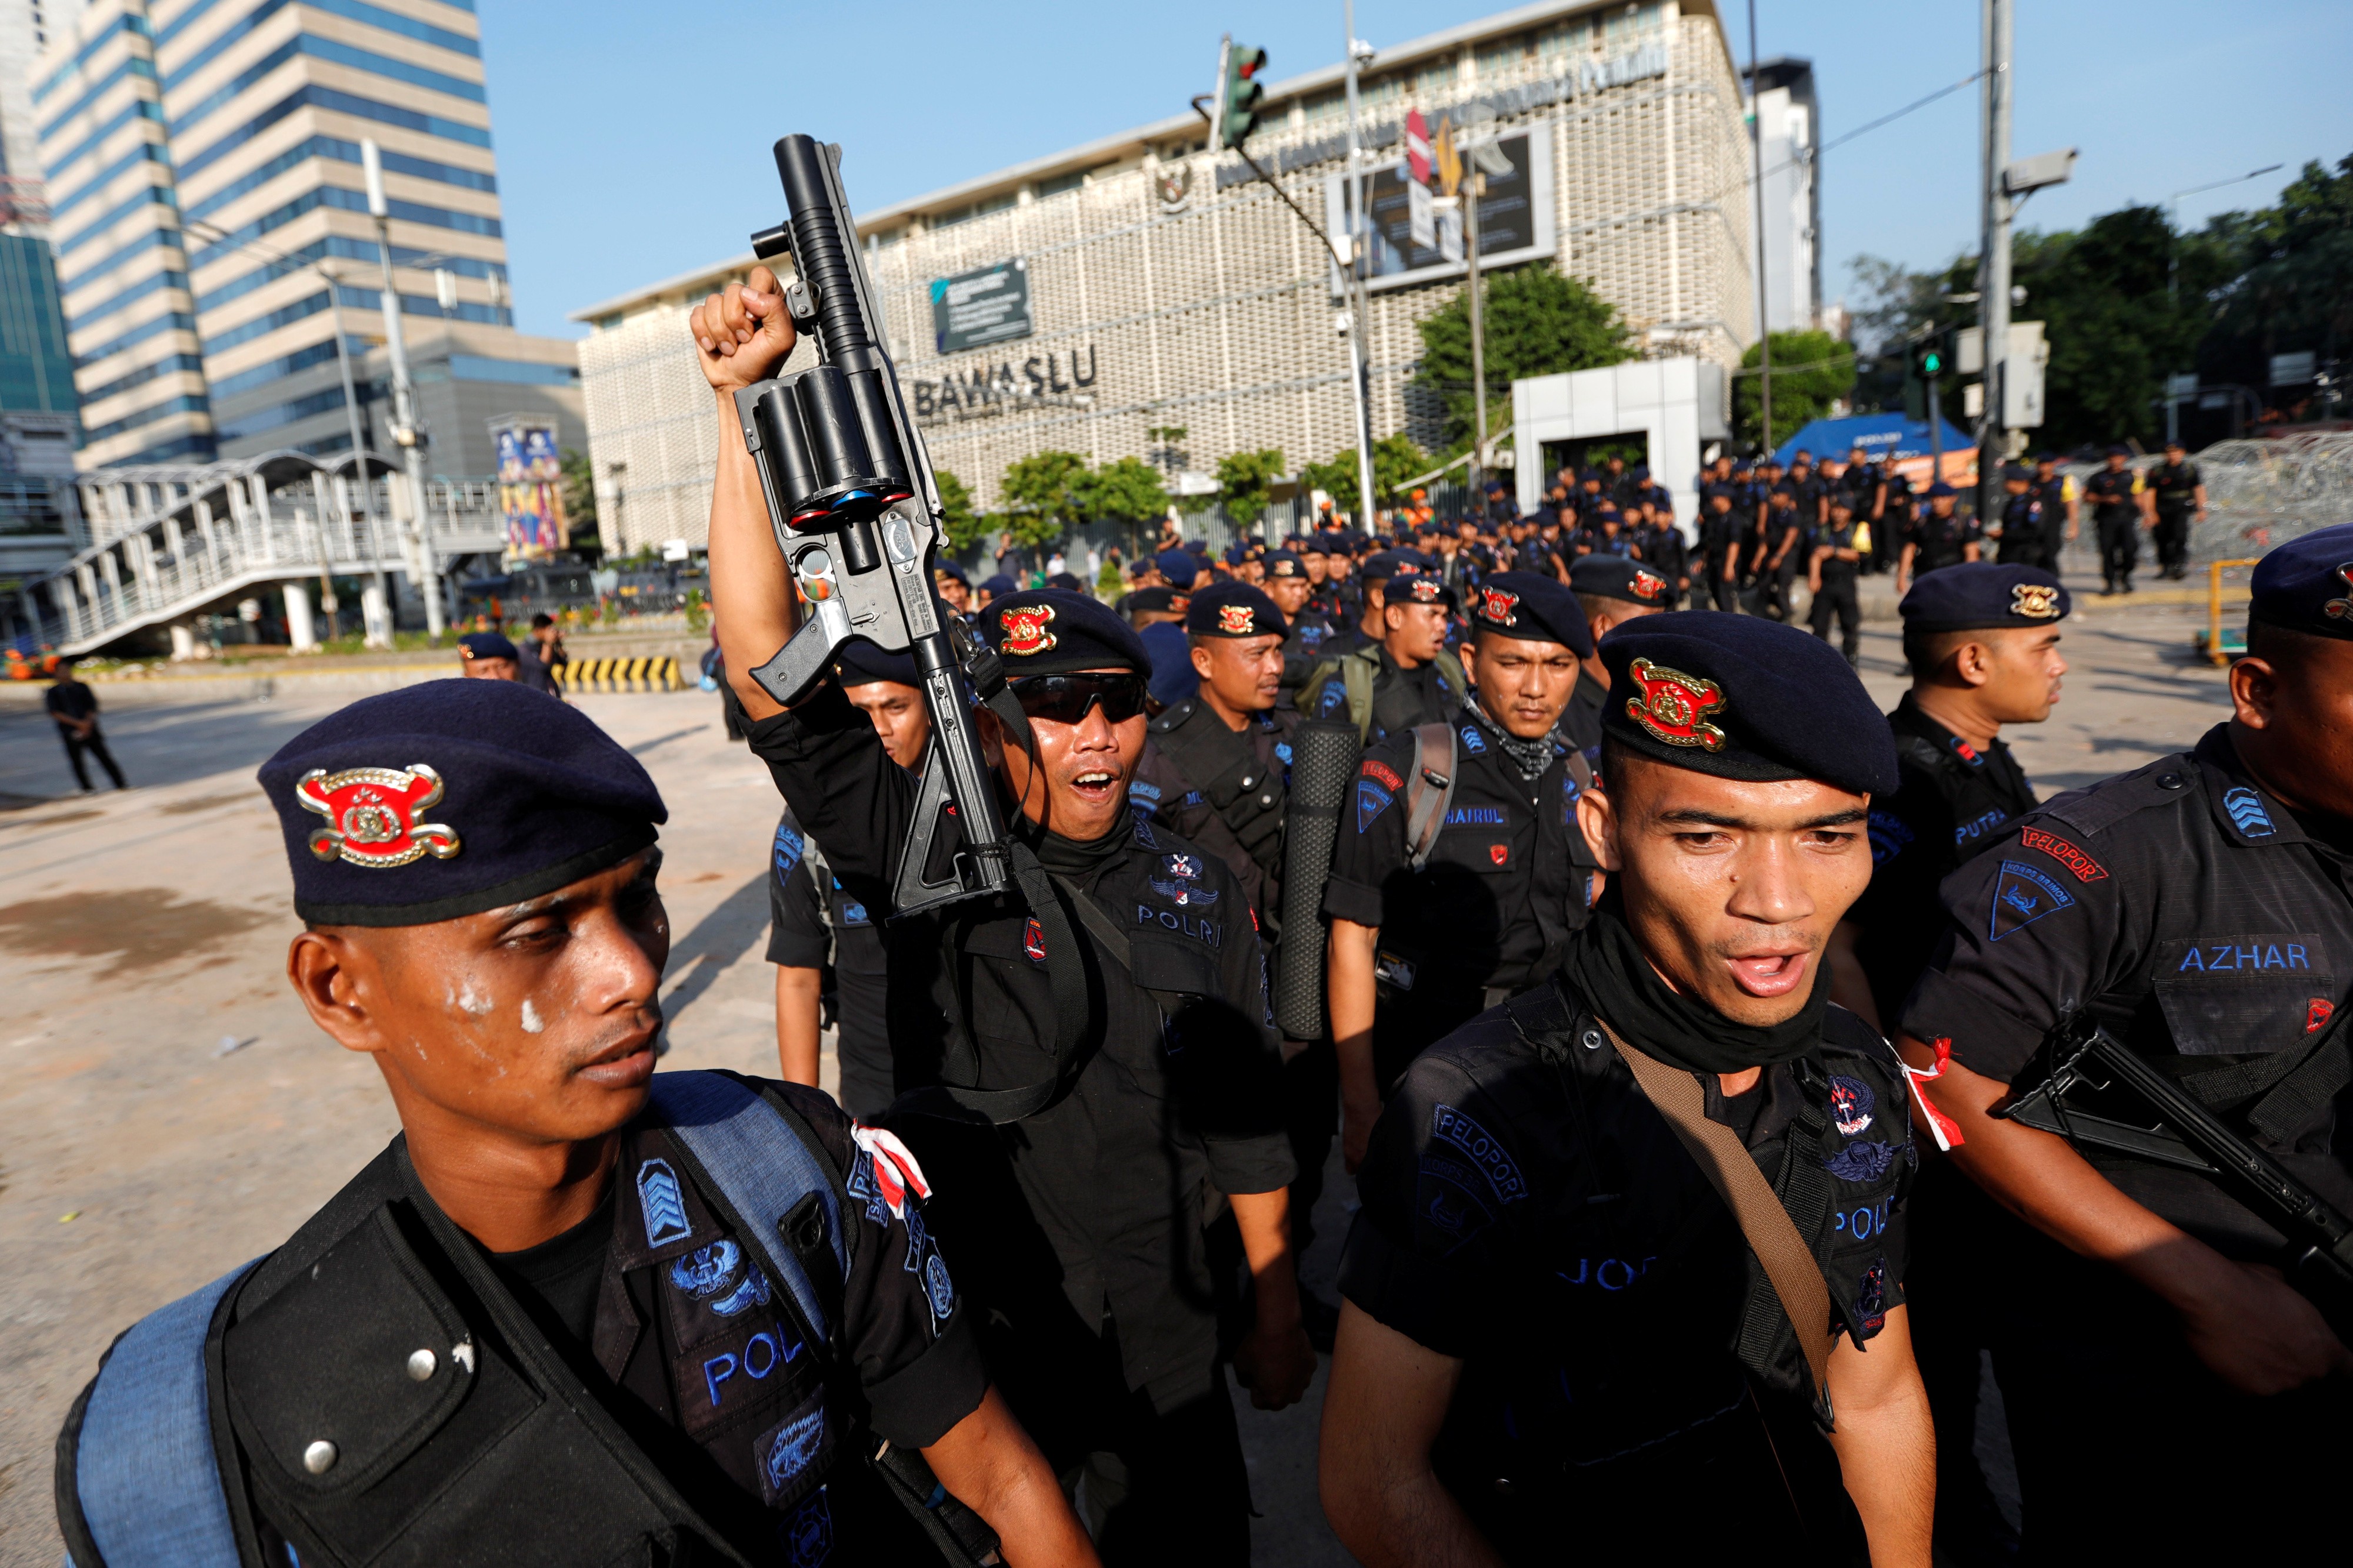 Police officers leave a protest area outside the Election Supervisory Agency (Bawaslu) headquarters in Jakarta. Photo: Reuters